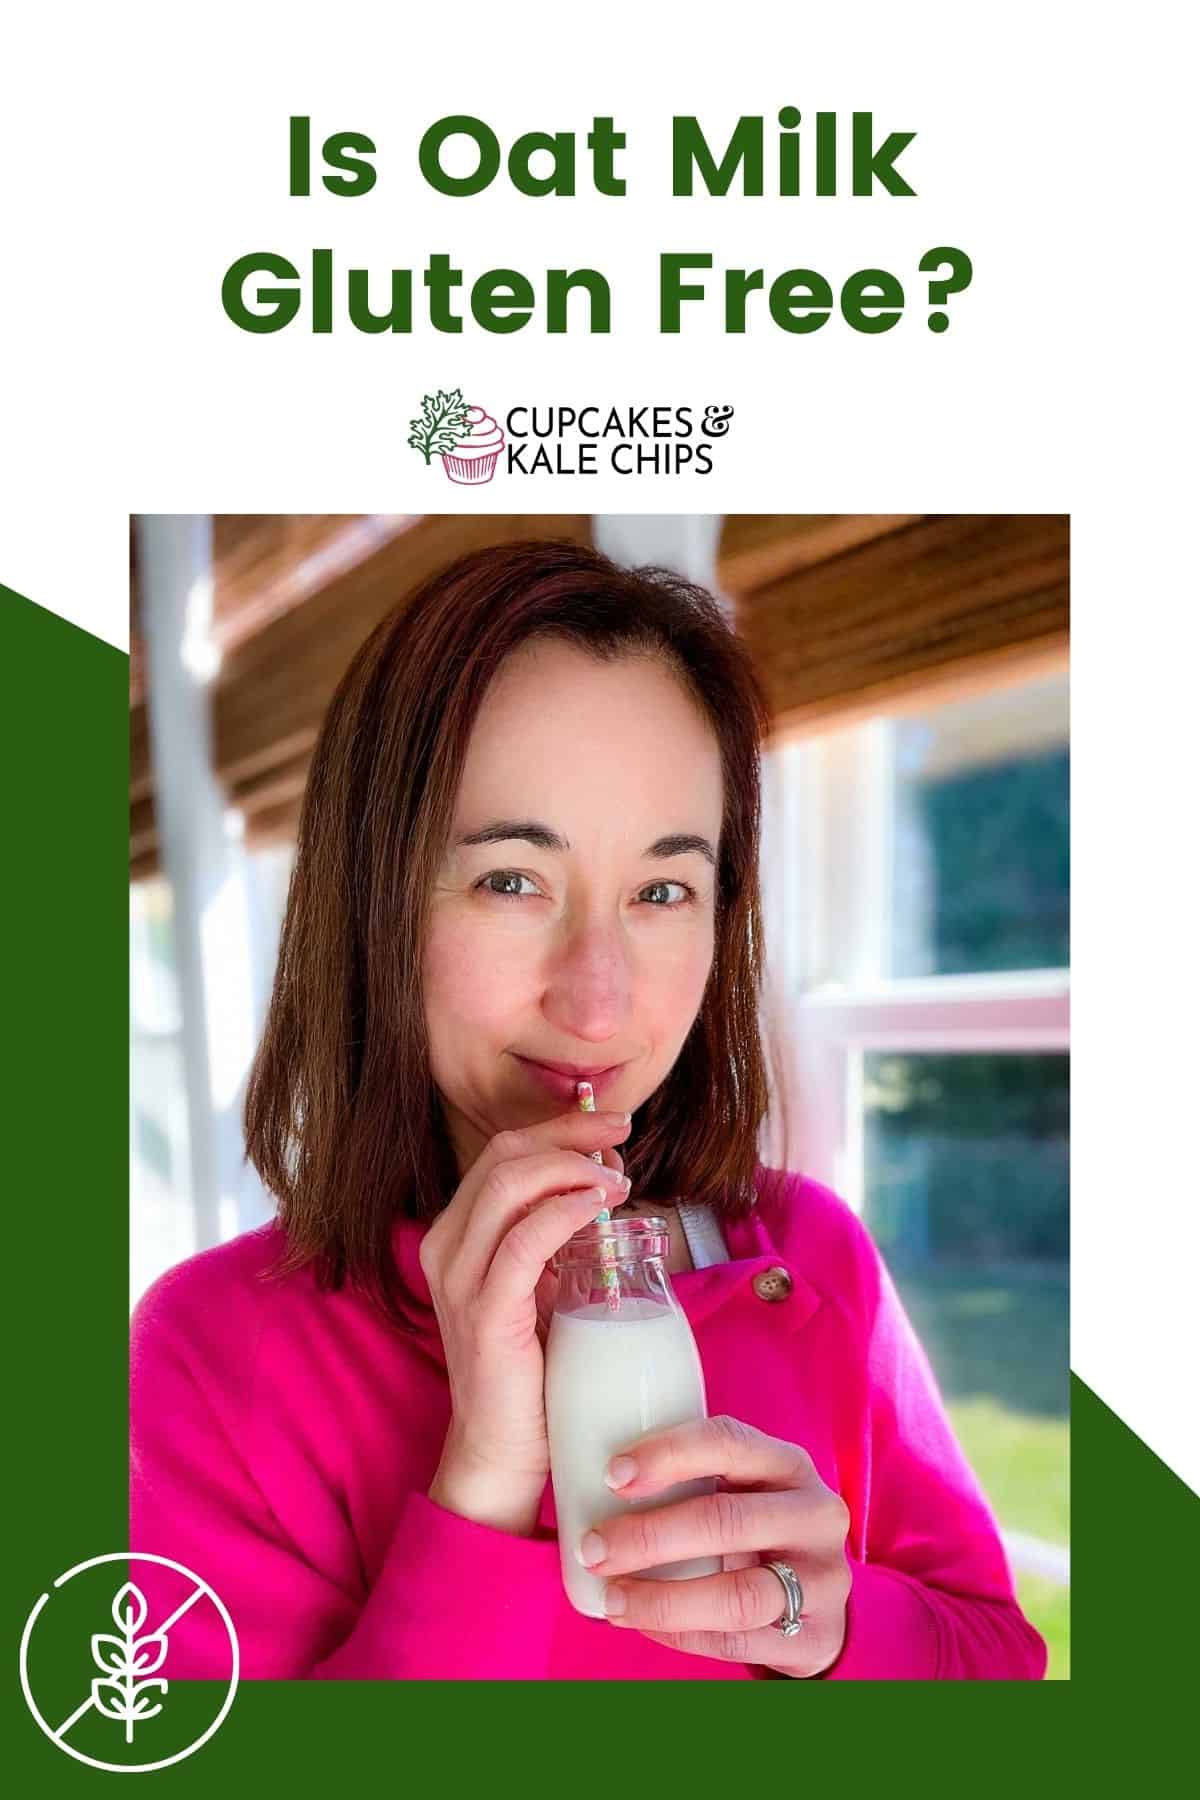 A woman drinking oat milk from a glass bottle on a green and white background with green text overlay that says "Is Oat Milk Gluten Free?"